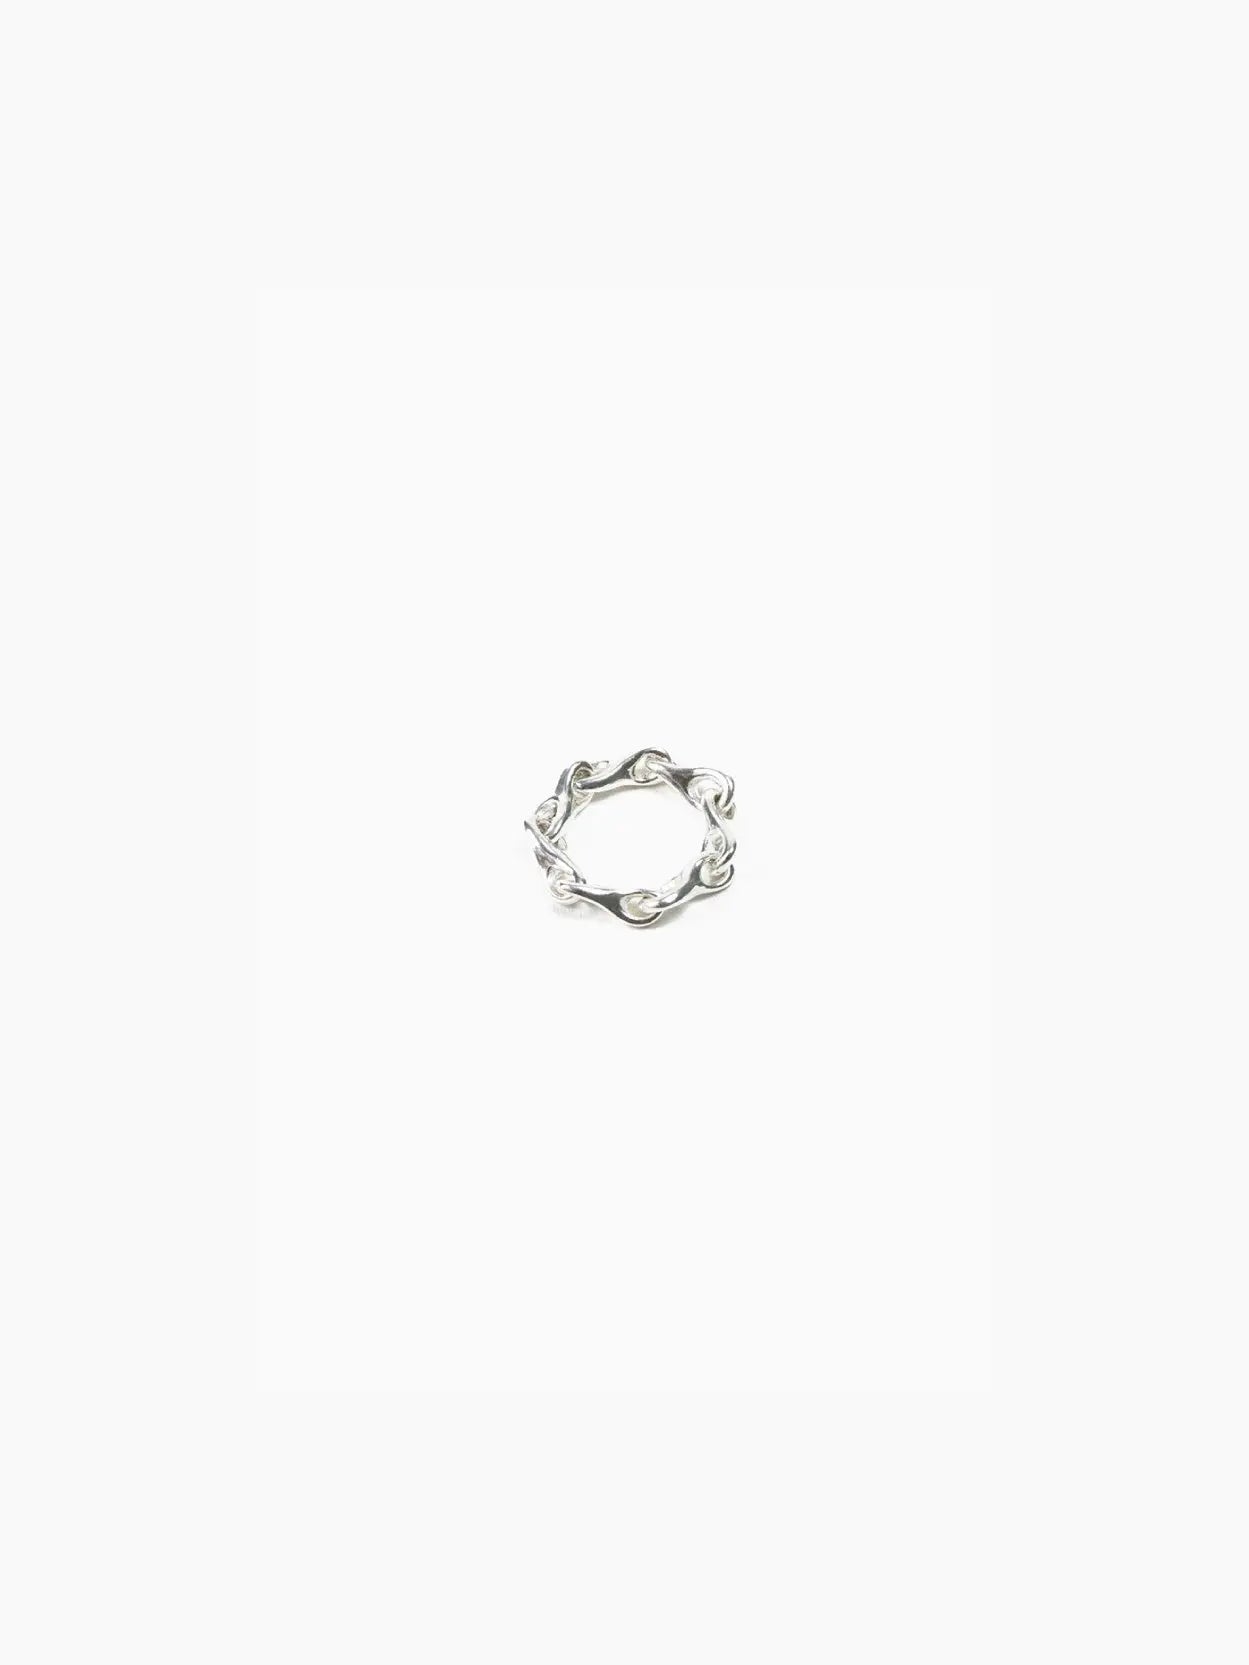 A silver Elo Chain Ring with an intricate, wavy design sits against a plain white background. Available at Bassalstore in Barcelona, the ring's band features interconnected loops and curves, giving it an elegant and unique appearance. Created by Nathalie Schreckenberg.